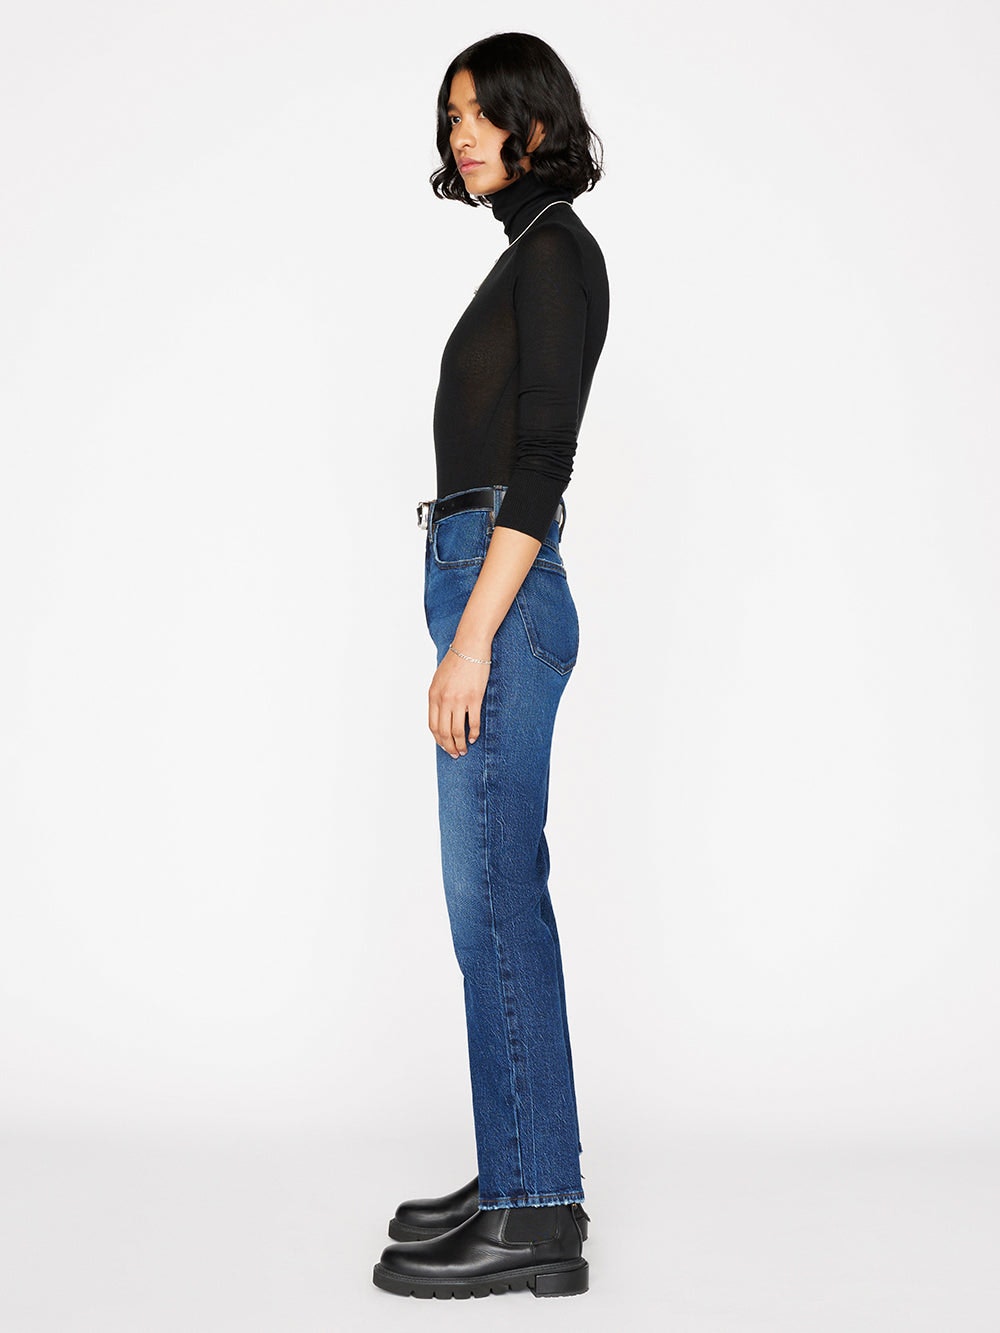 A woman wearing the Frame Le High 'N' Tight Straight - Hallam jeans and a turtle neck.